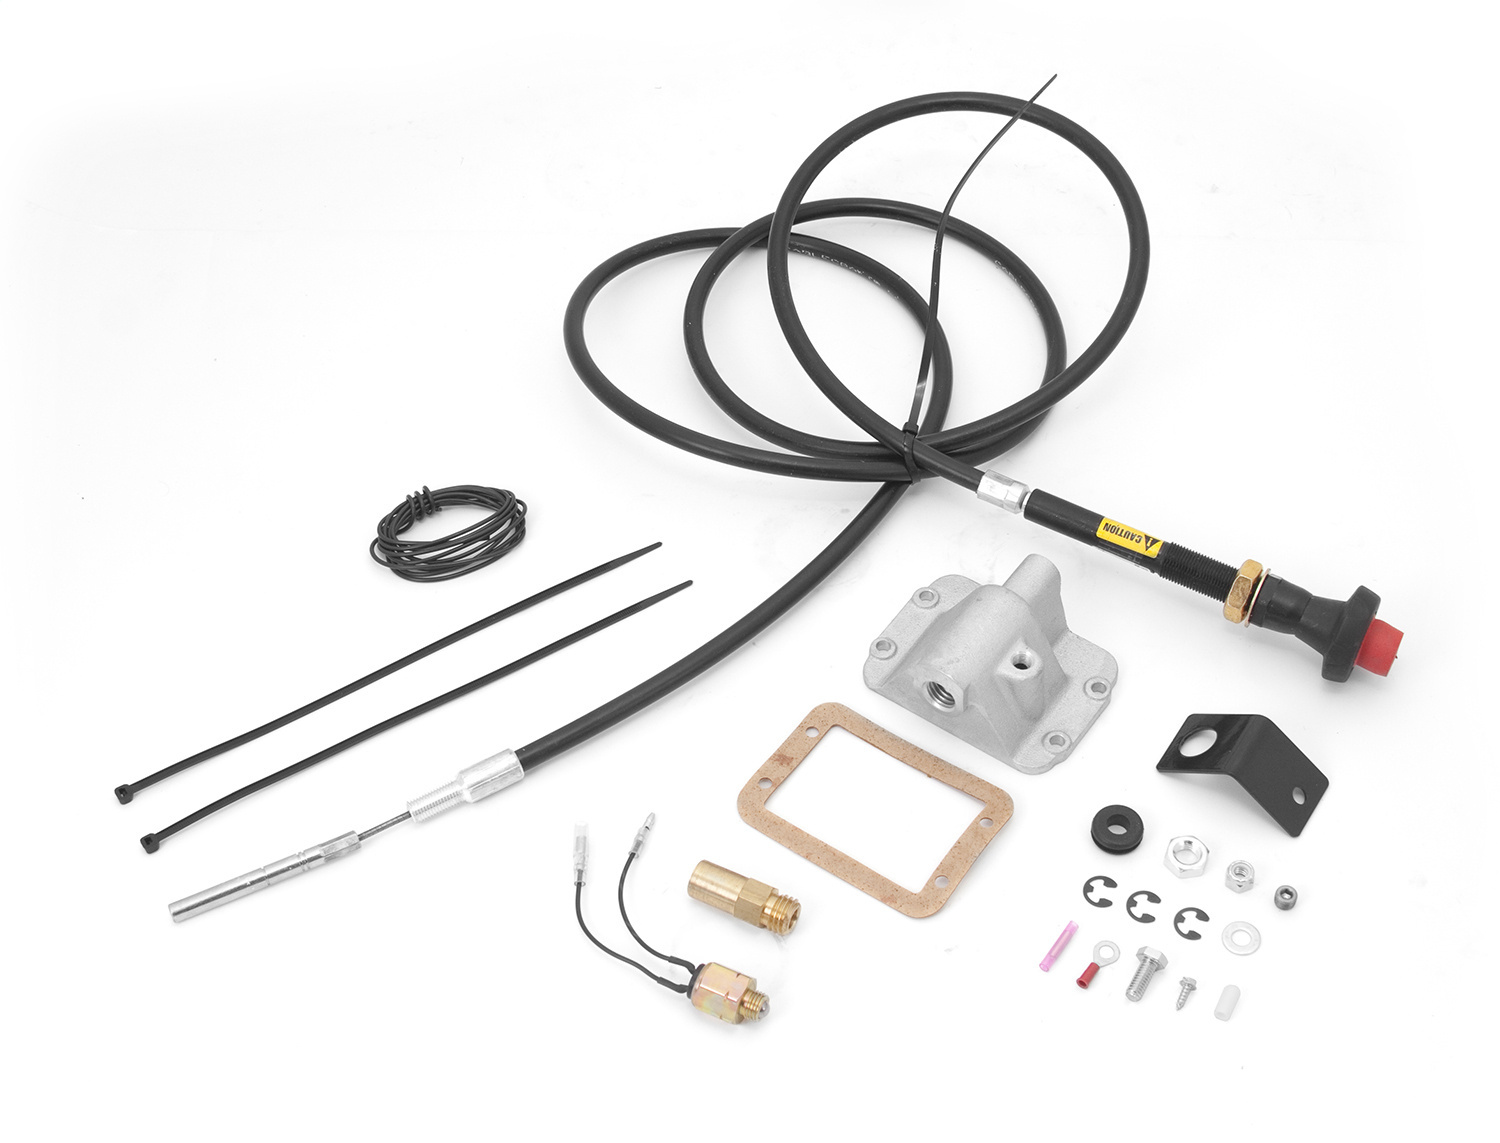 Alloy USA Alloy USA 450900 Differential Cable Lock Disconnect Kit